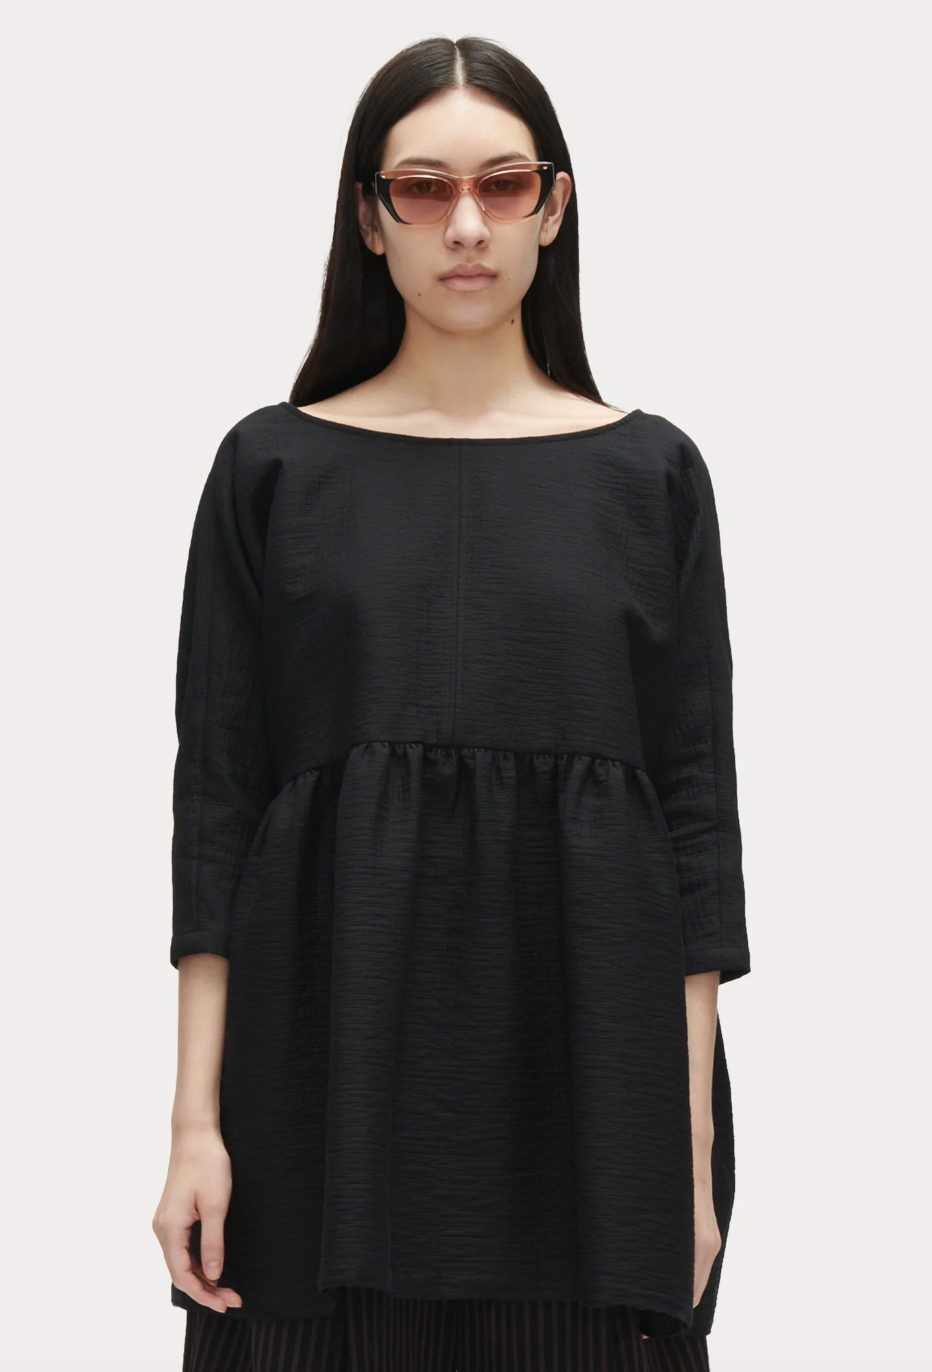 Product Image for Oust Top, Black